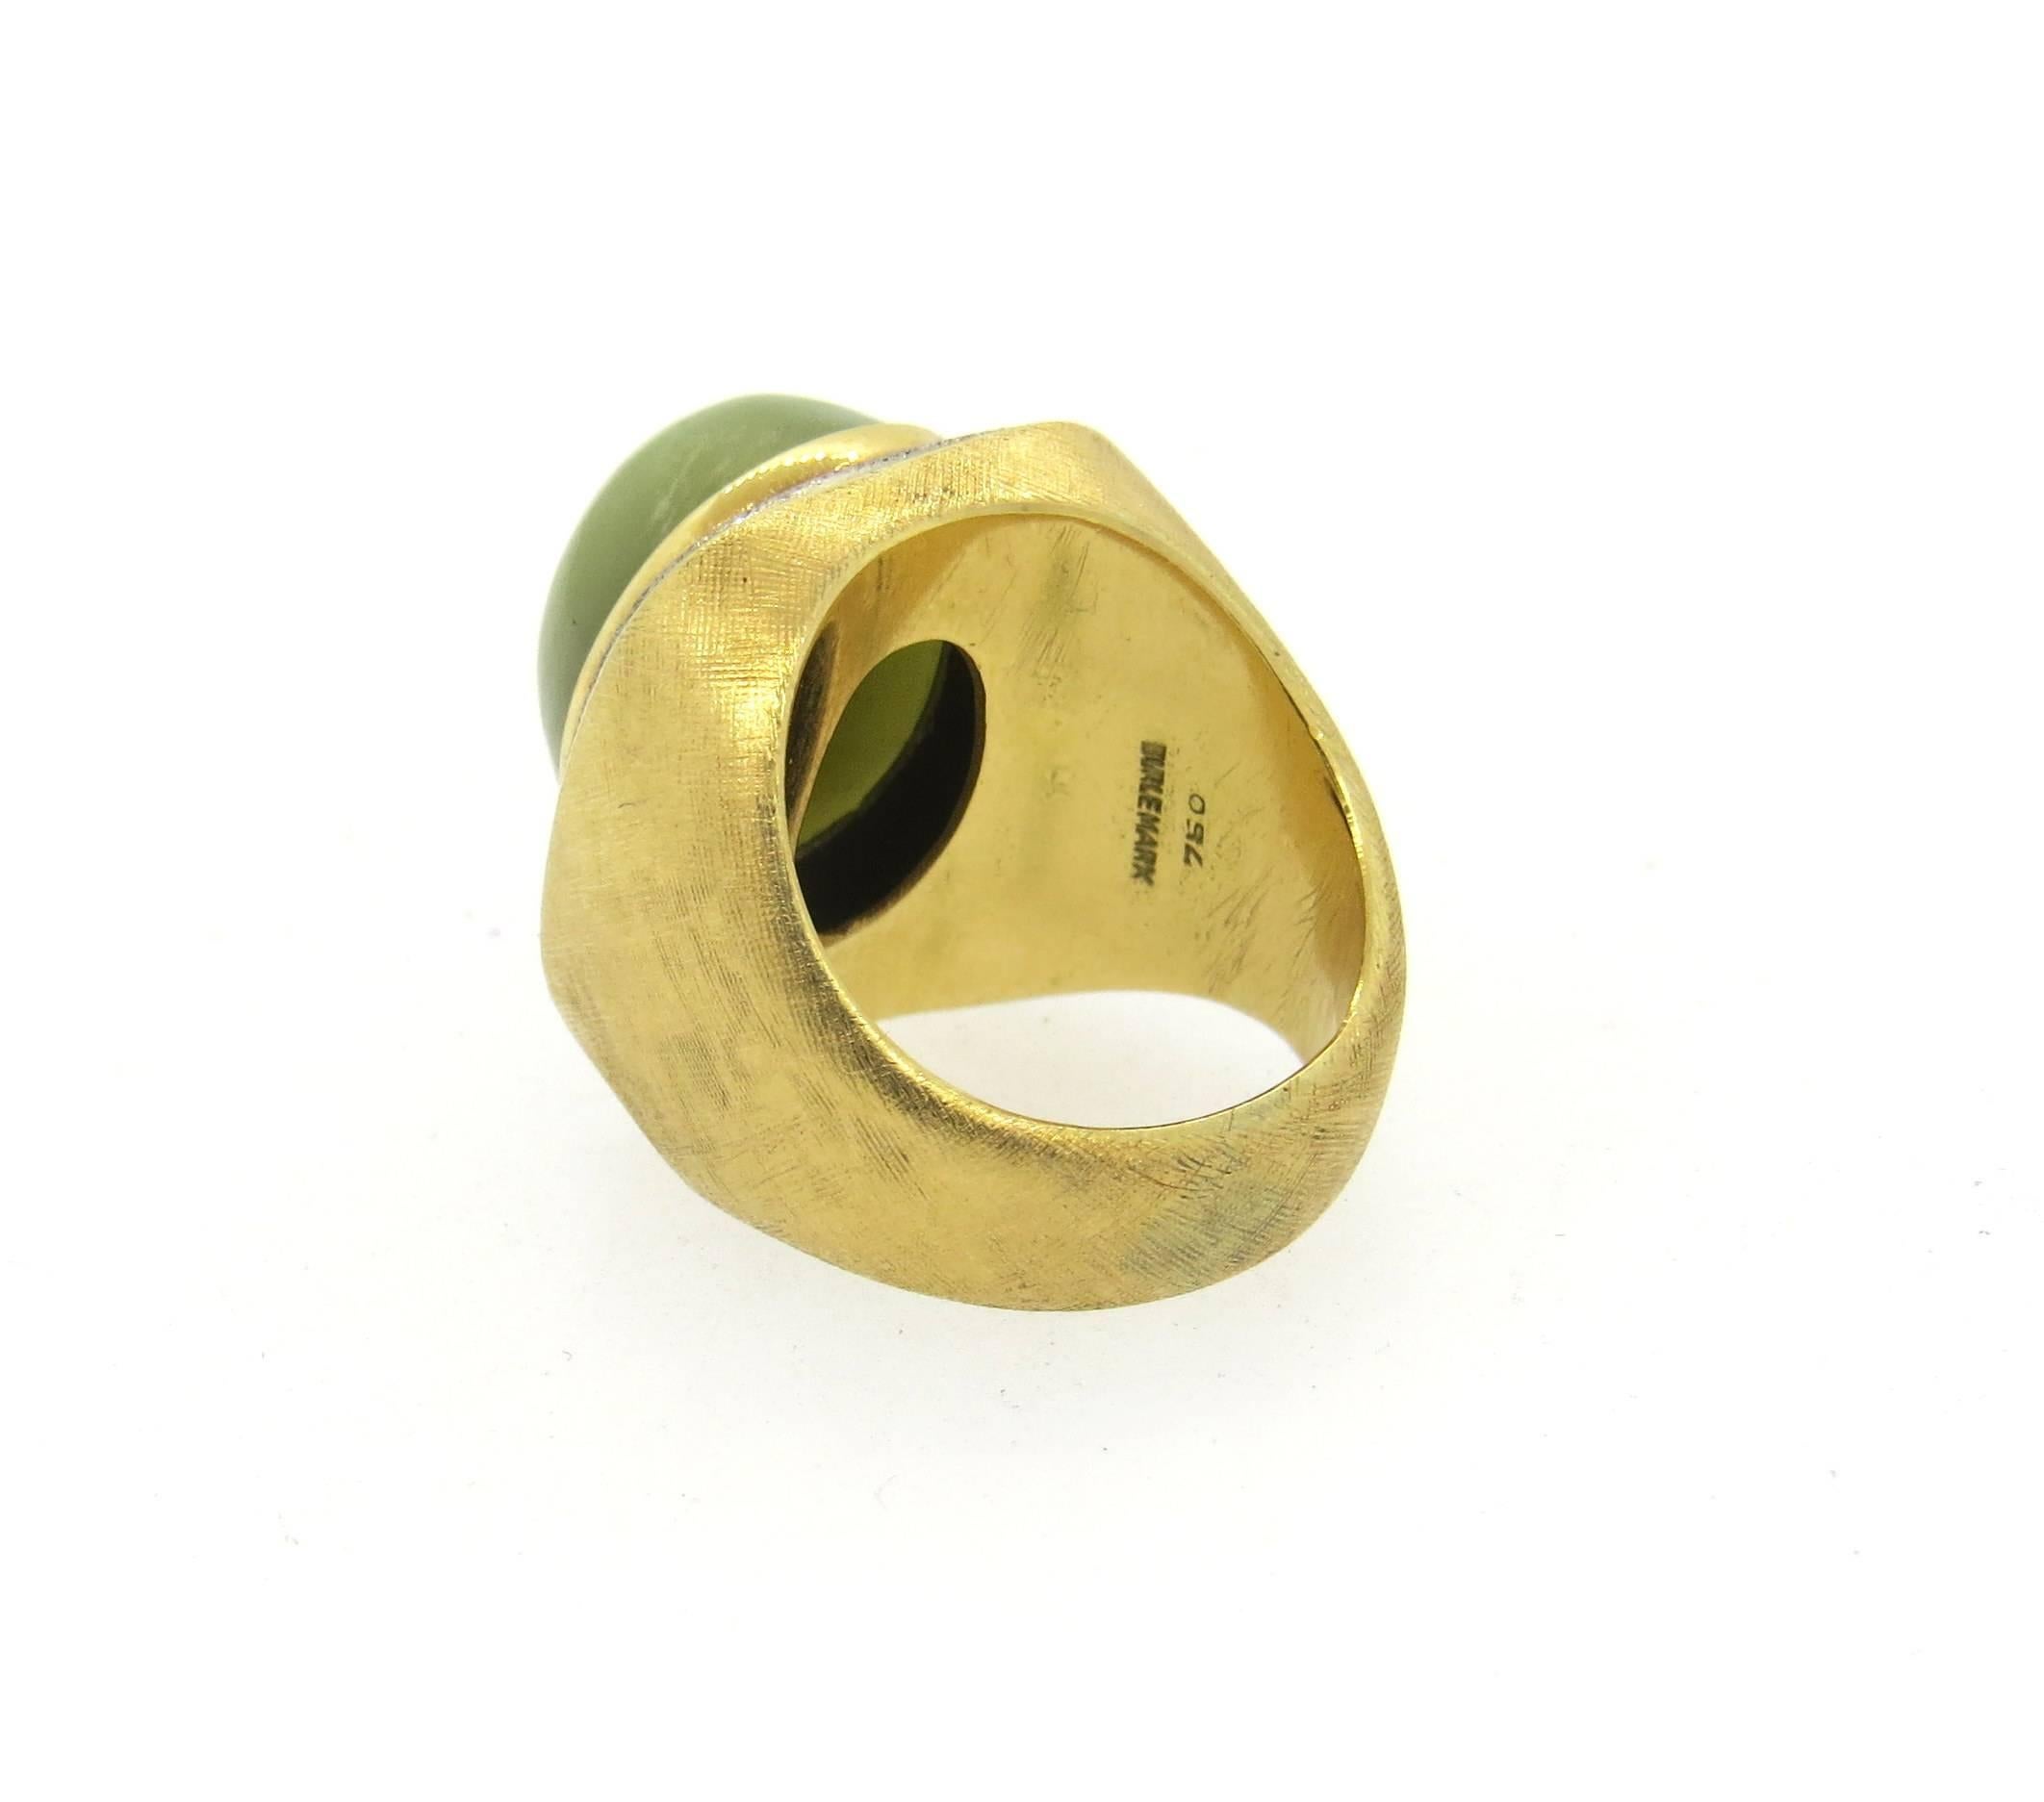 18k gold ring, crafted by Burle Marx, set with 16mm x 13mm green gemstone cabochon. Ring size 4 3/4, ring top is 19mm x 18mm. Marked: 750, Burle Marx . Weight of the piece - 11.9 grams 